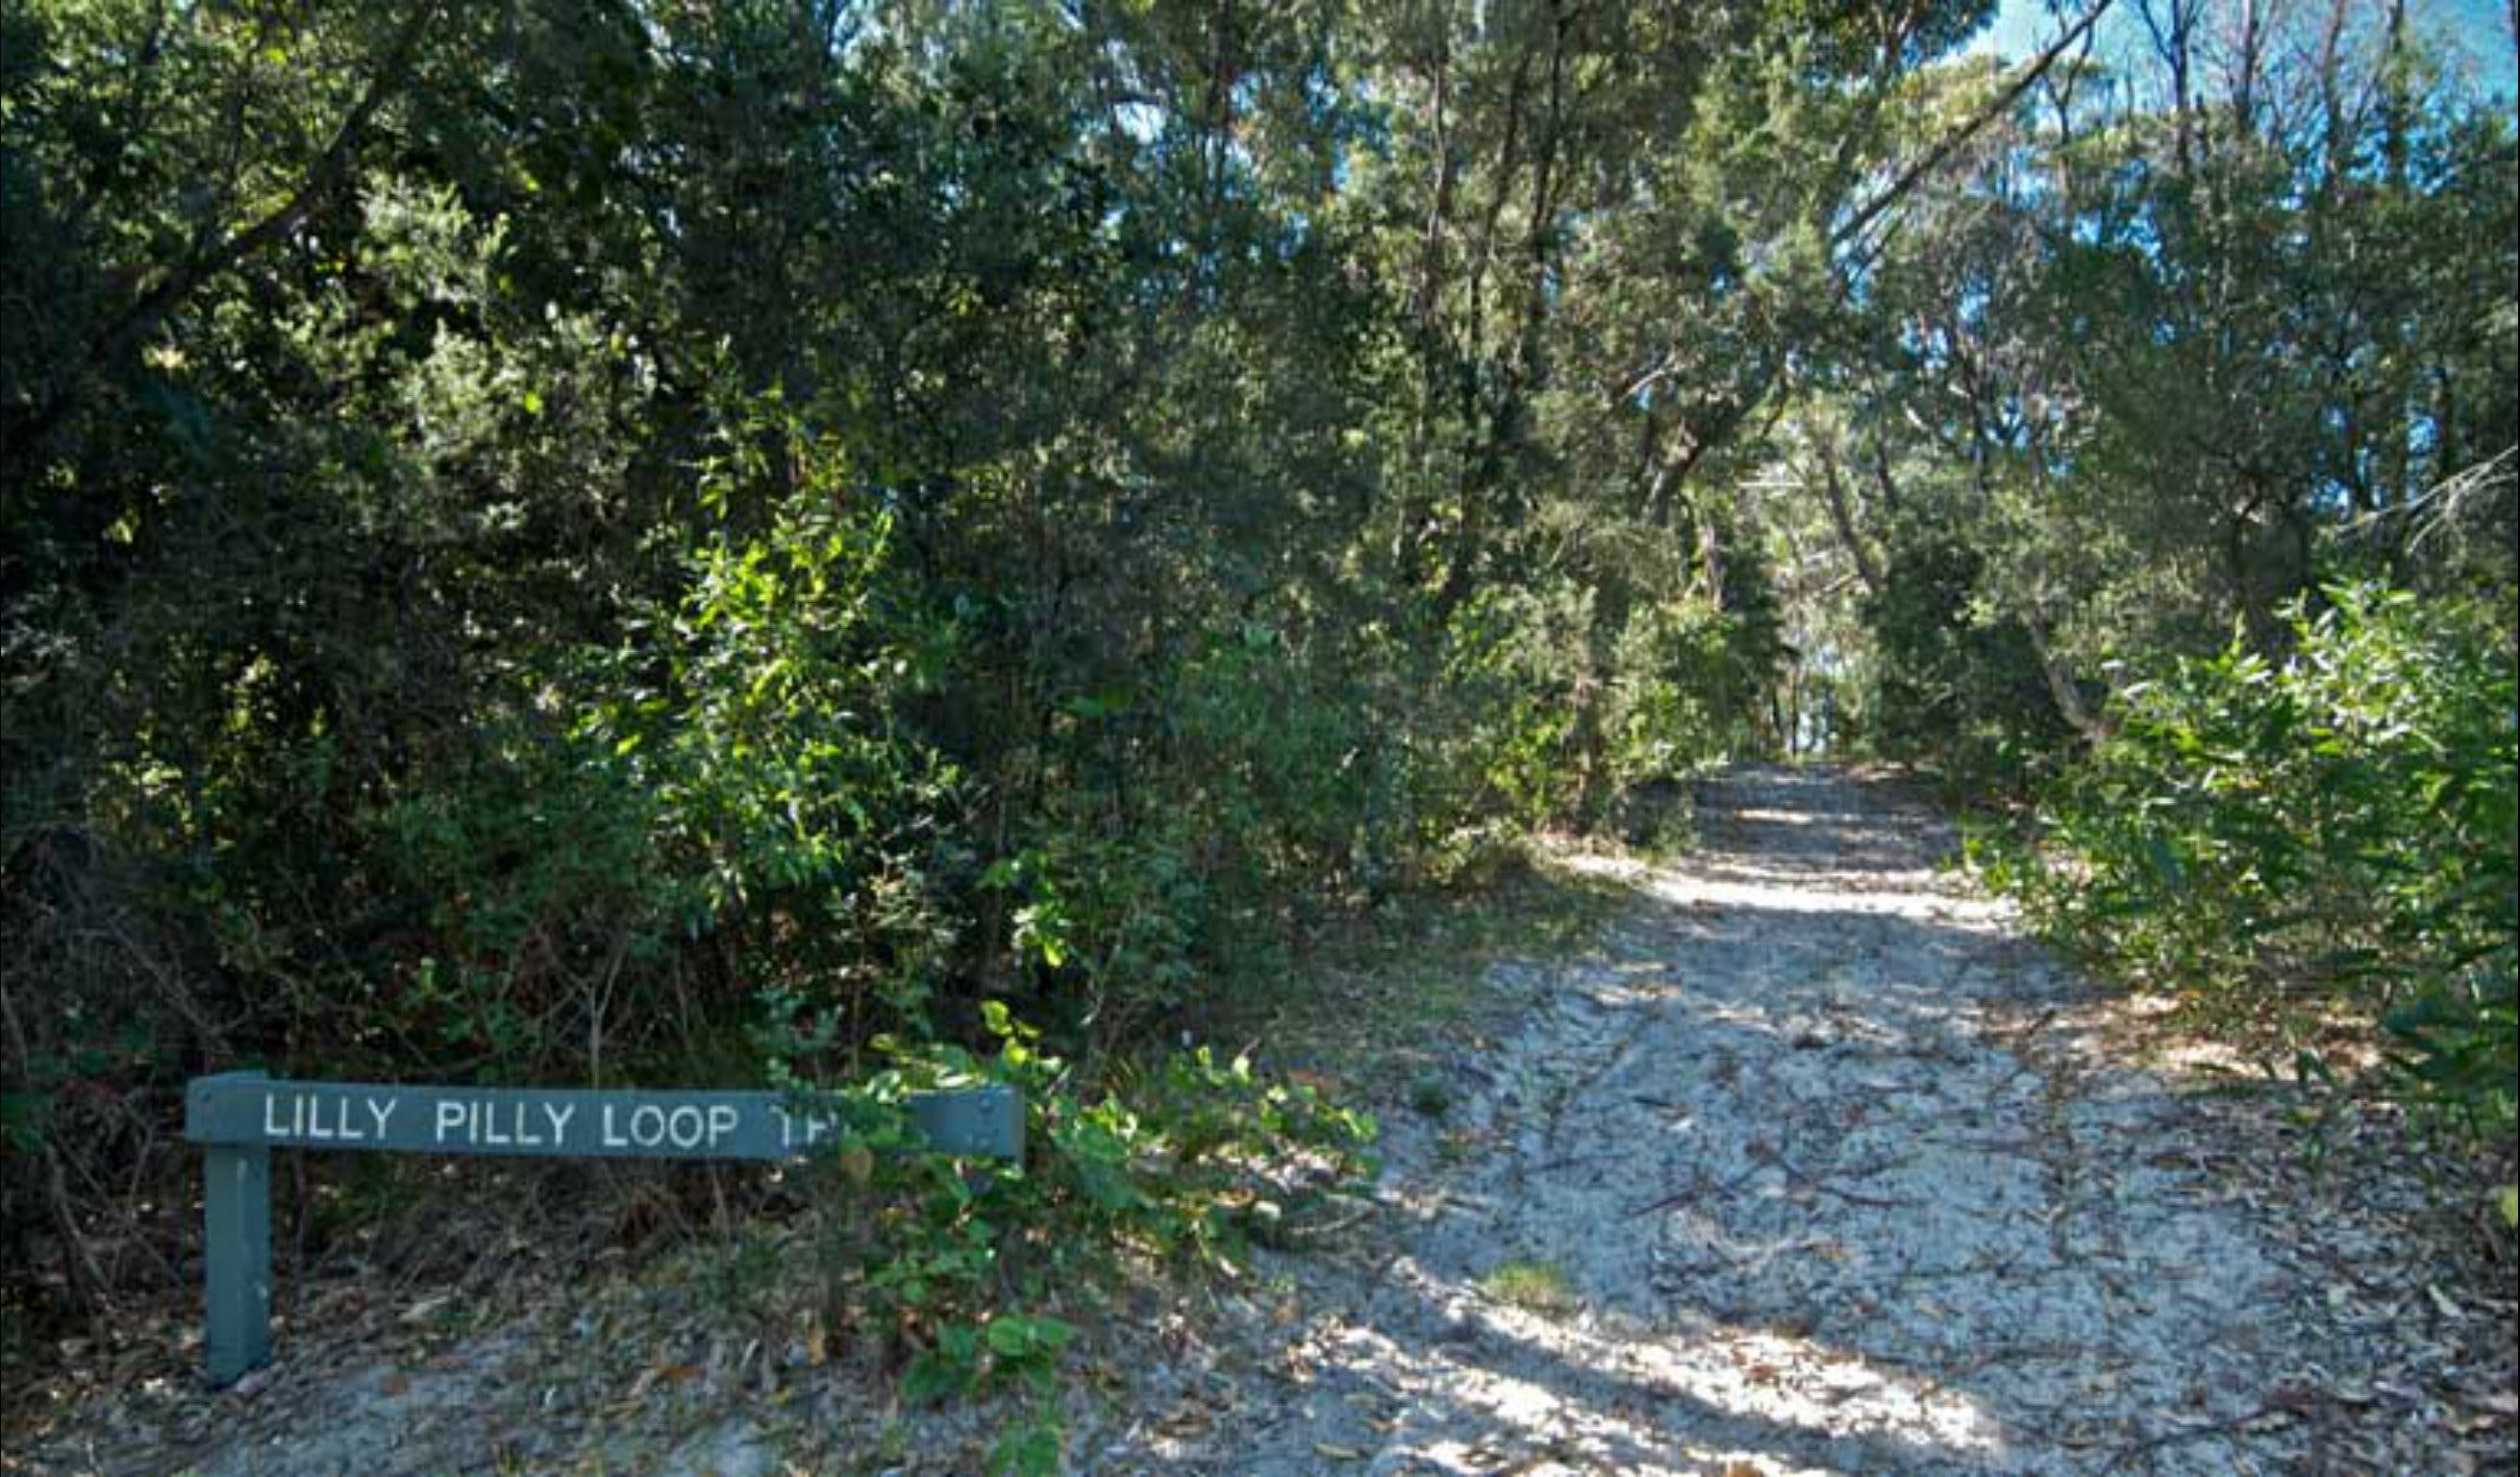 Lillypilly loop trail - Attractions Melbourne